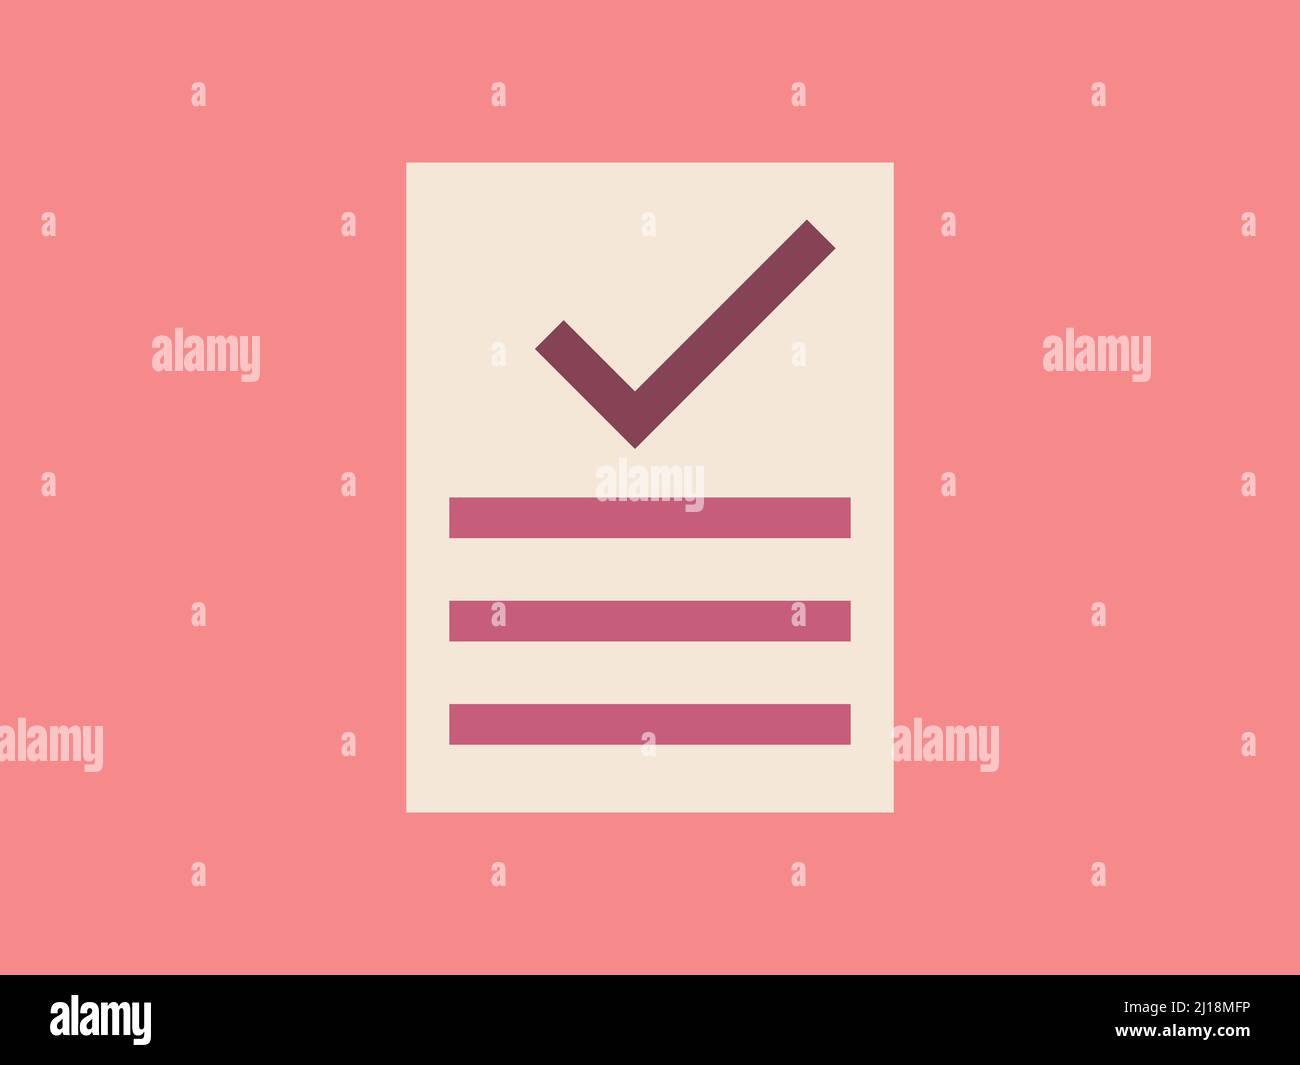 True facts. Facts check icon. Reliable information illustration. Checklist concept. Stock Photo